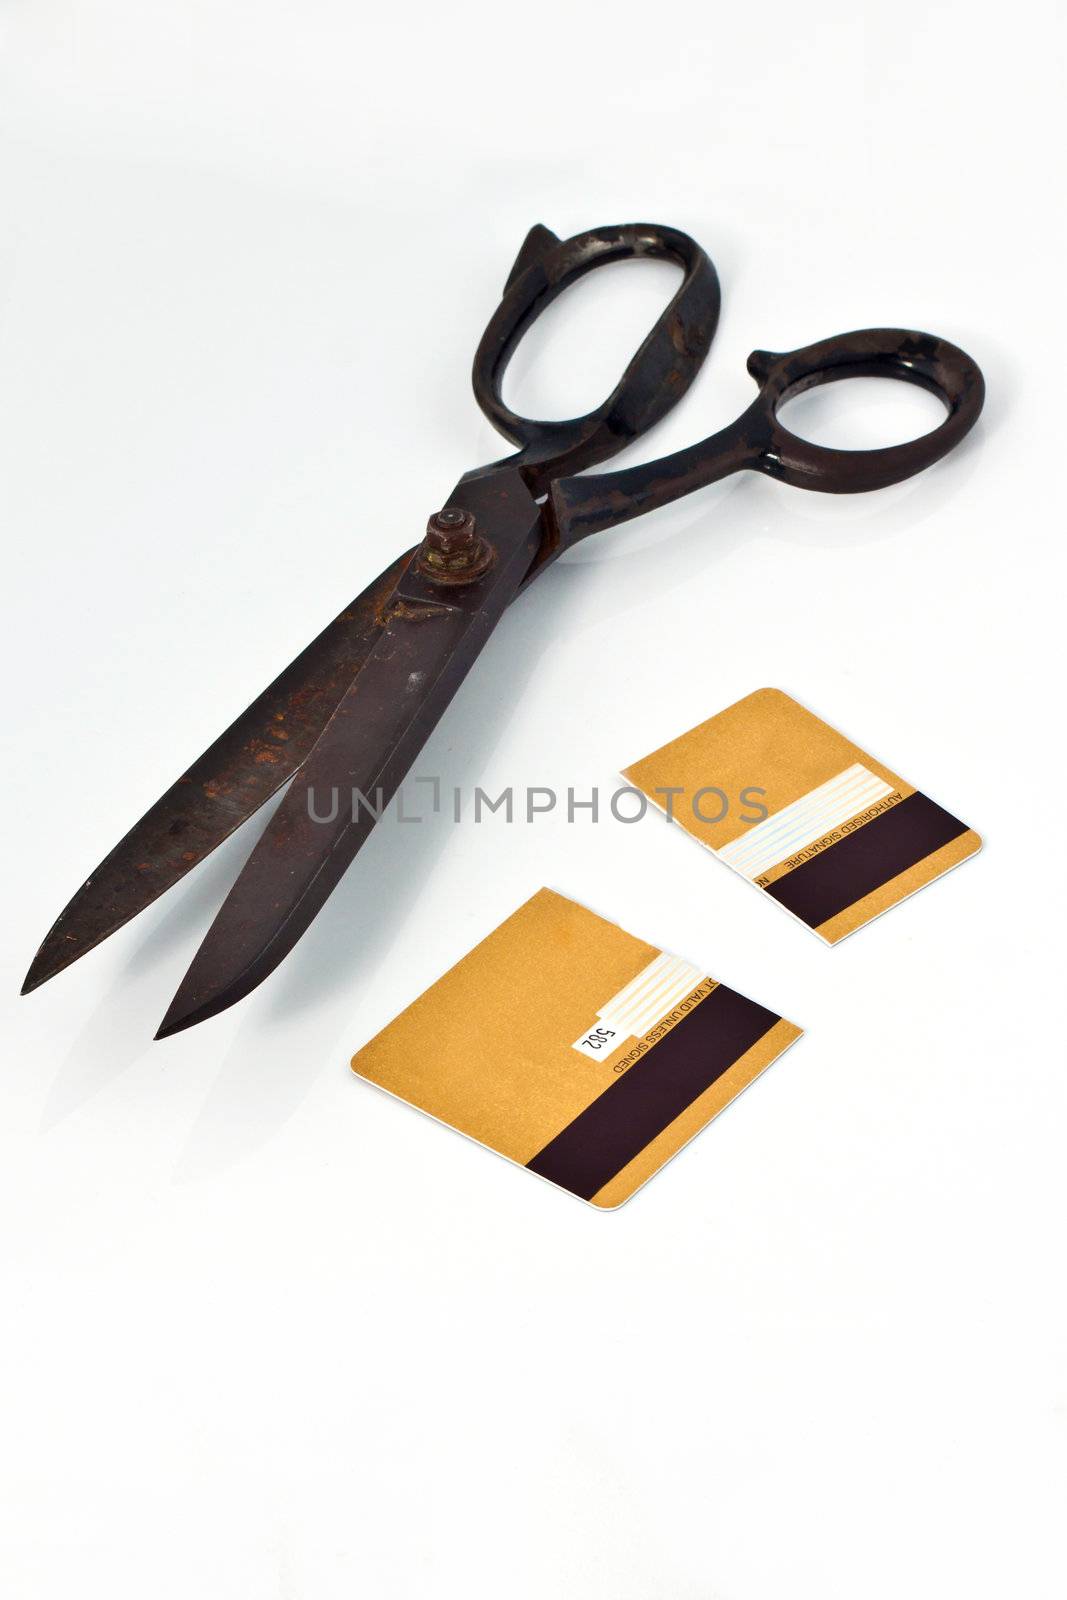 Old rusty scissors and cut gold credit card. Isolated on white background